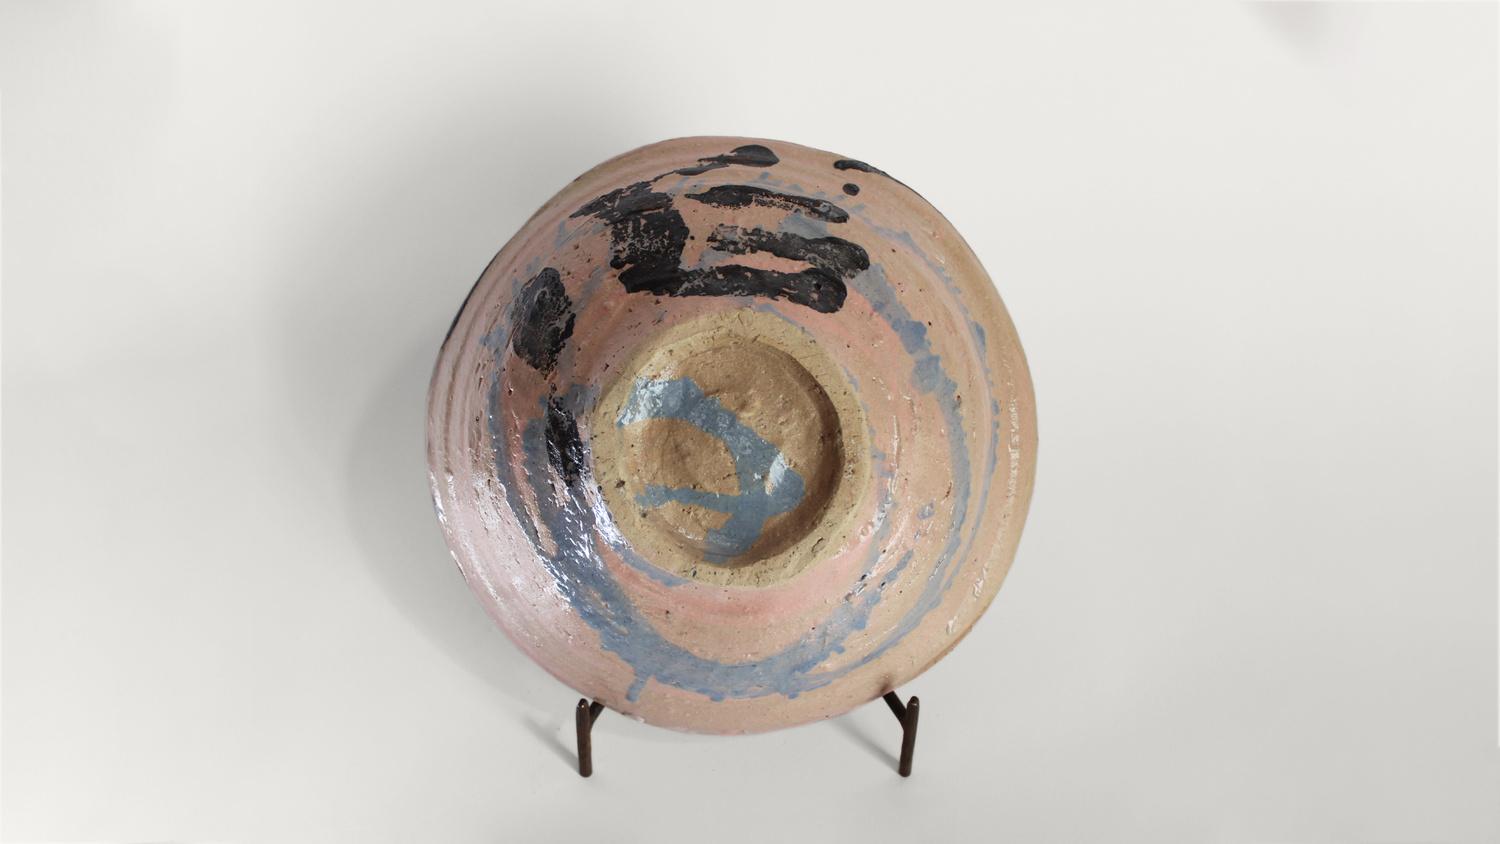 Terre Sonore 
Ø: 27 cm H: 10 cm
Sandstone 
Made in Japan
Unique piece
2023
This work comes with a certificate of authenticity.

Shun Kadohashi is a Japanese ceramic artist who lives and works in a small fishing village at the southern tip of the